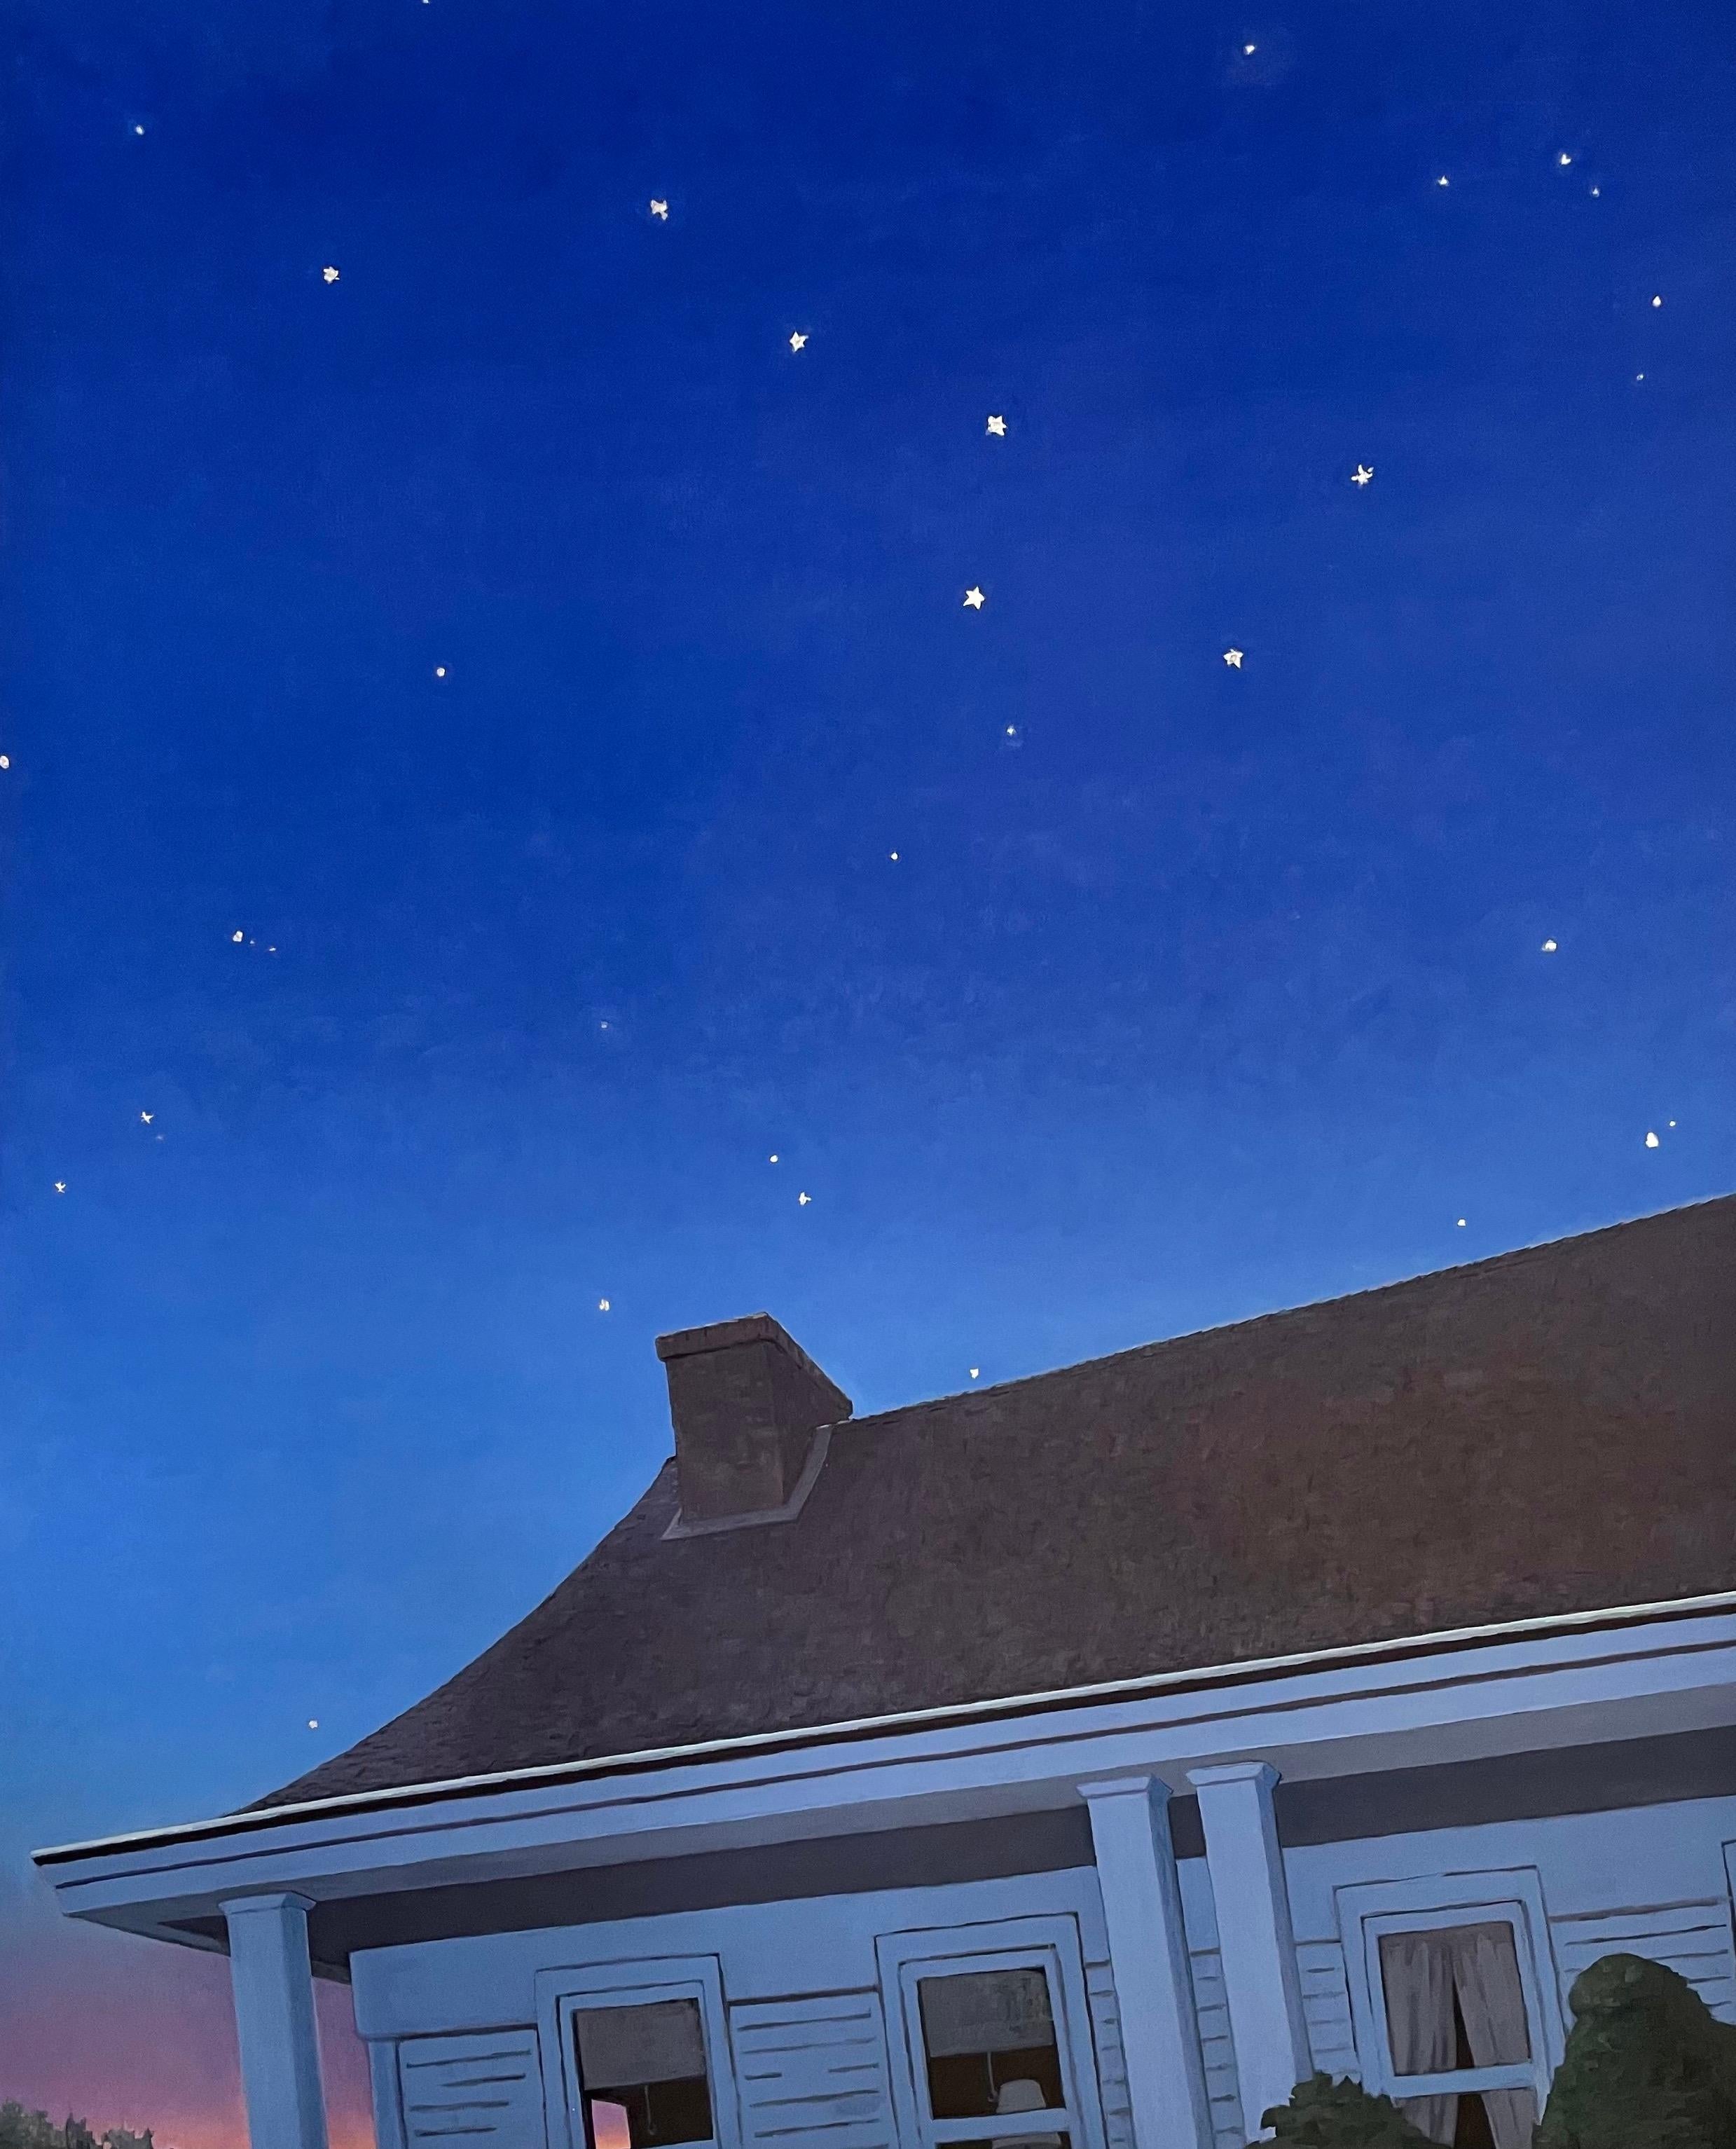 Look Up, Night Painting, White House Roof, Dark Blue Sky, White Gold Leaf Stars